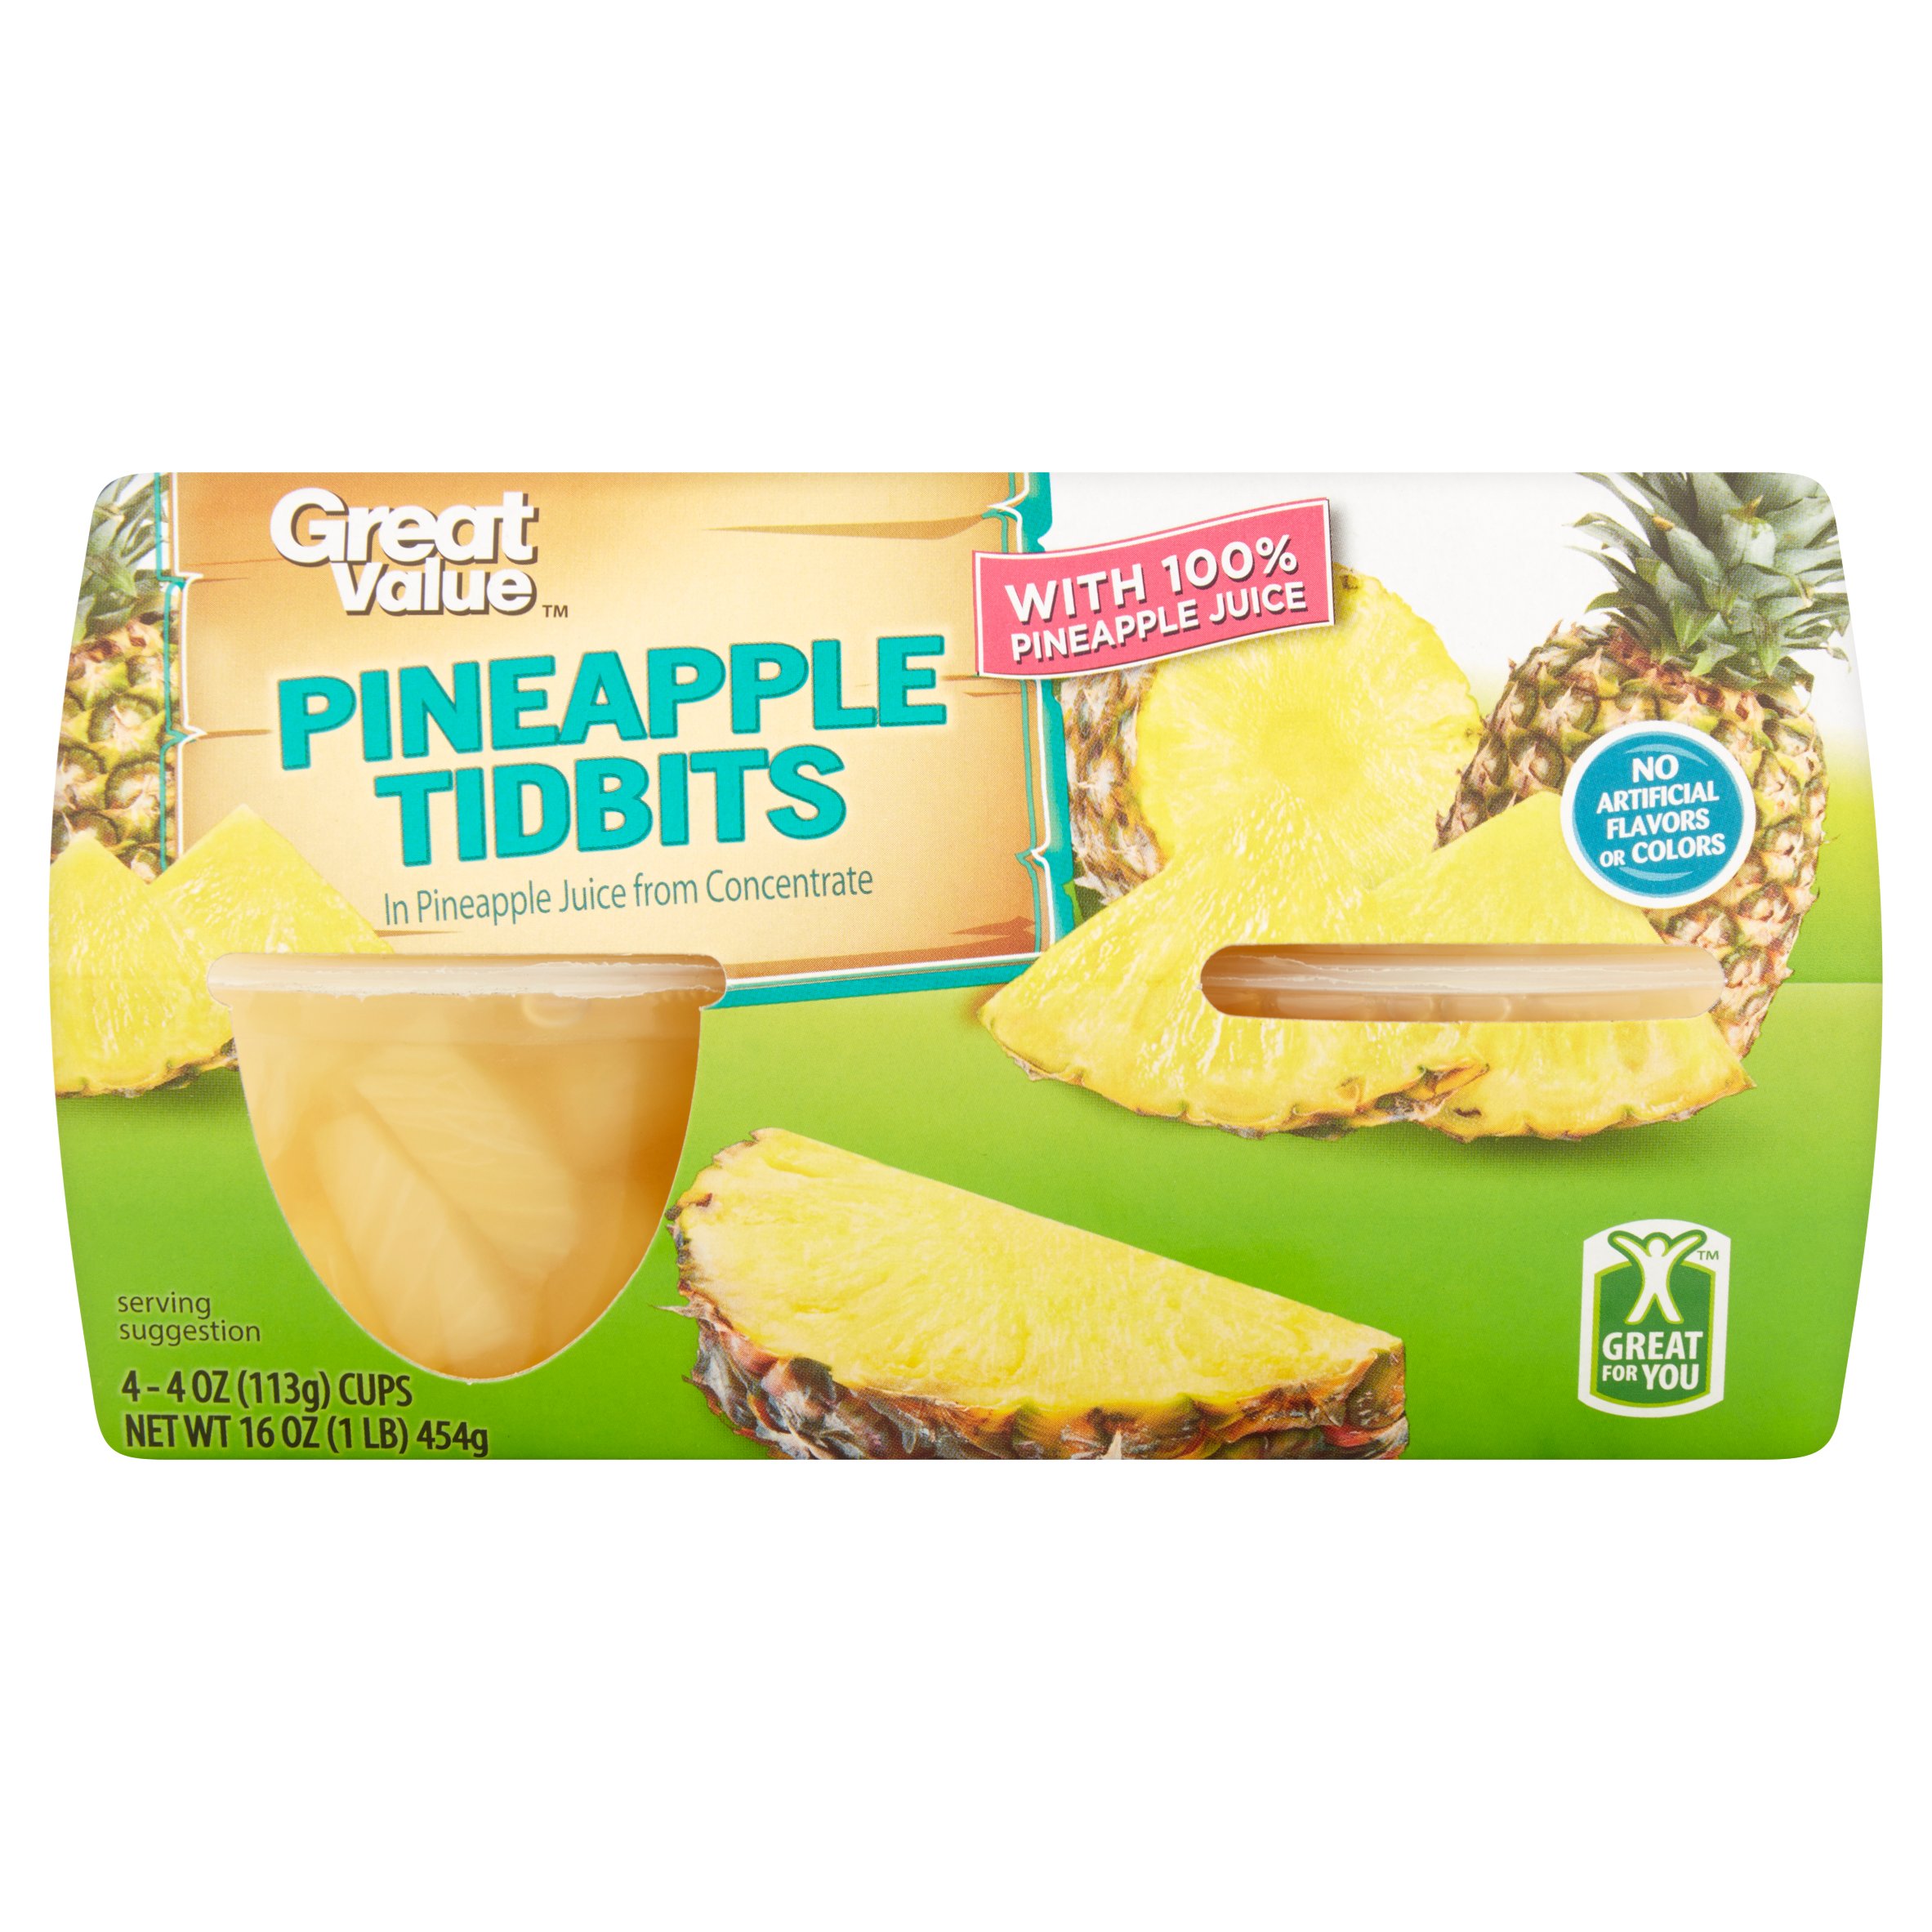 Great Value Pineapple Tidbits in 100% Pineapple Juice, 4 Oz, 4 Count Image